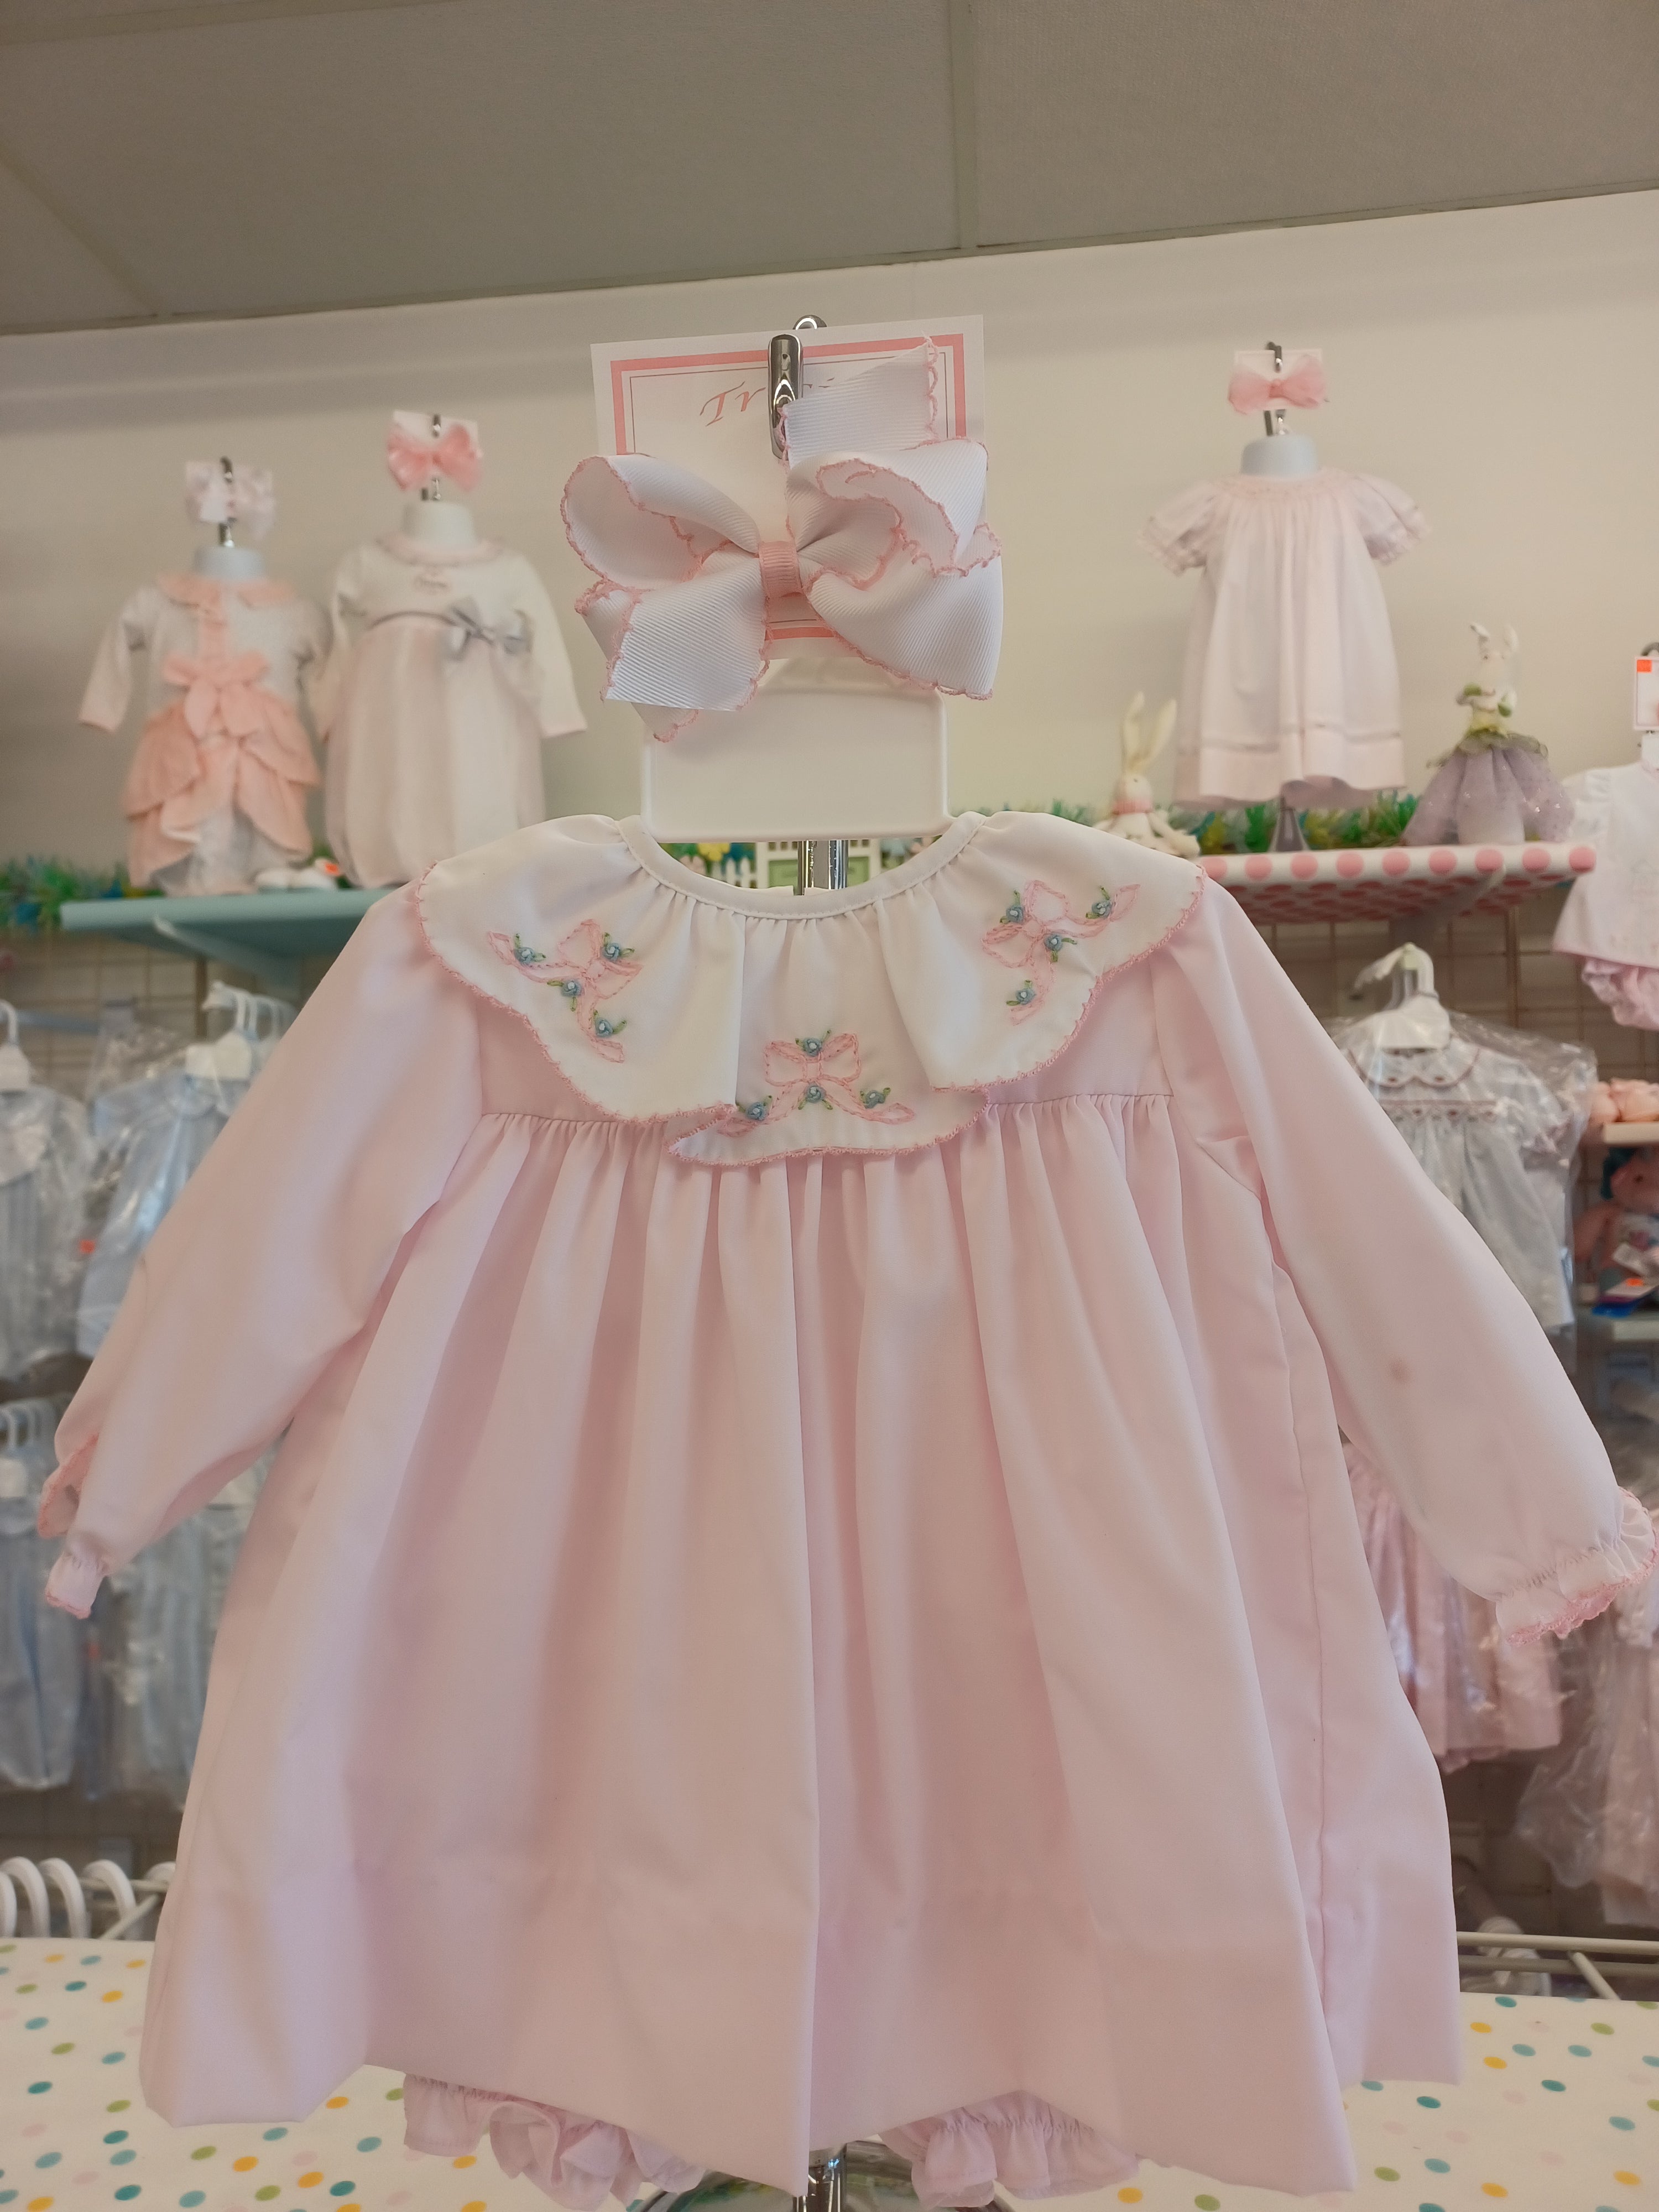 Newborn long sleeve dress with bloomers and bows.